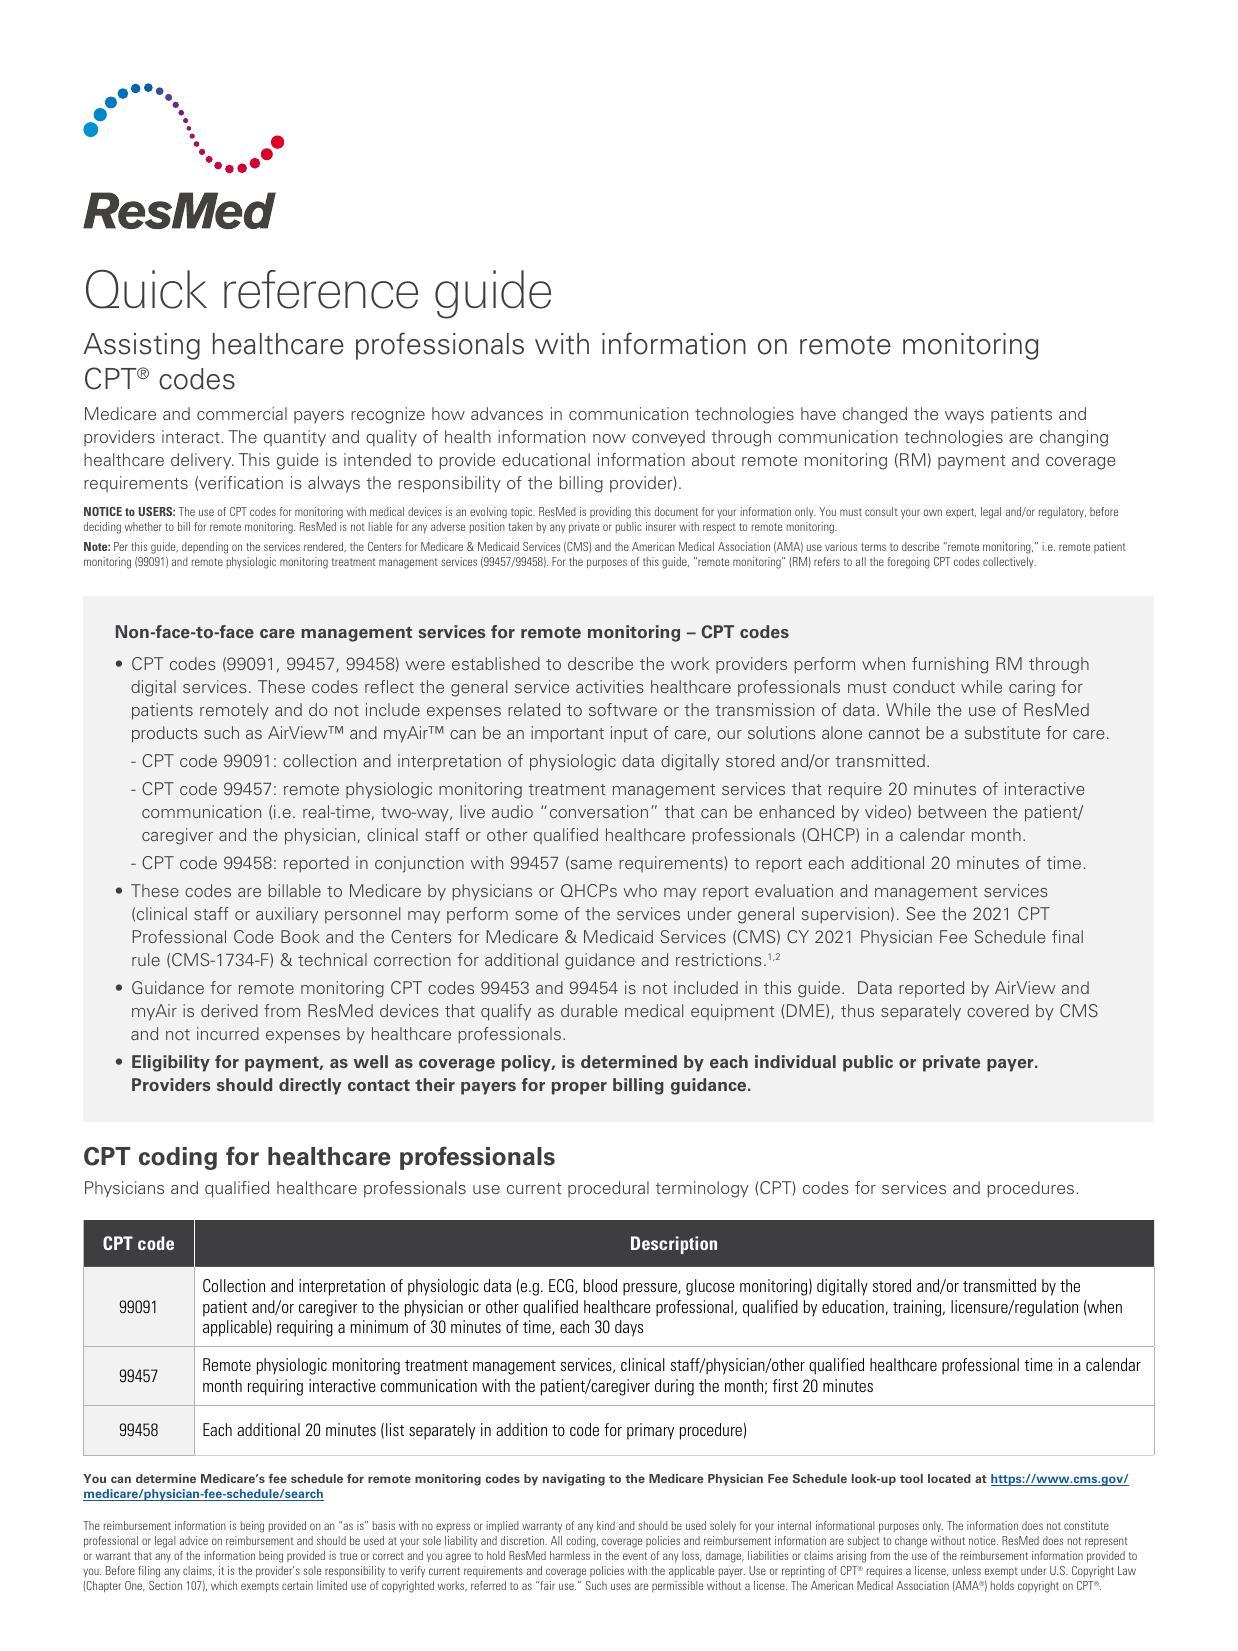 resmed-quick-reference-guide-assisting-healthcare-professionals-with-remote-monitoring-cpt-codes.pdf